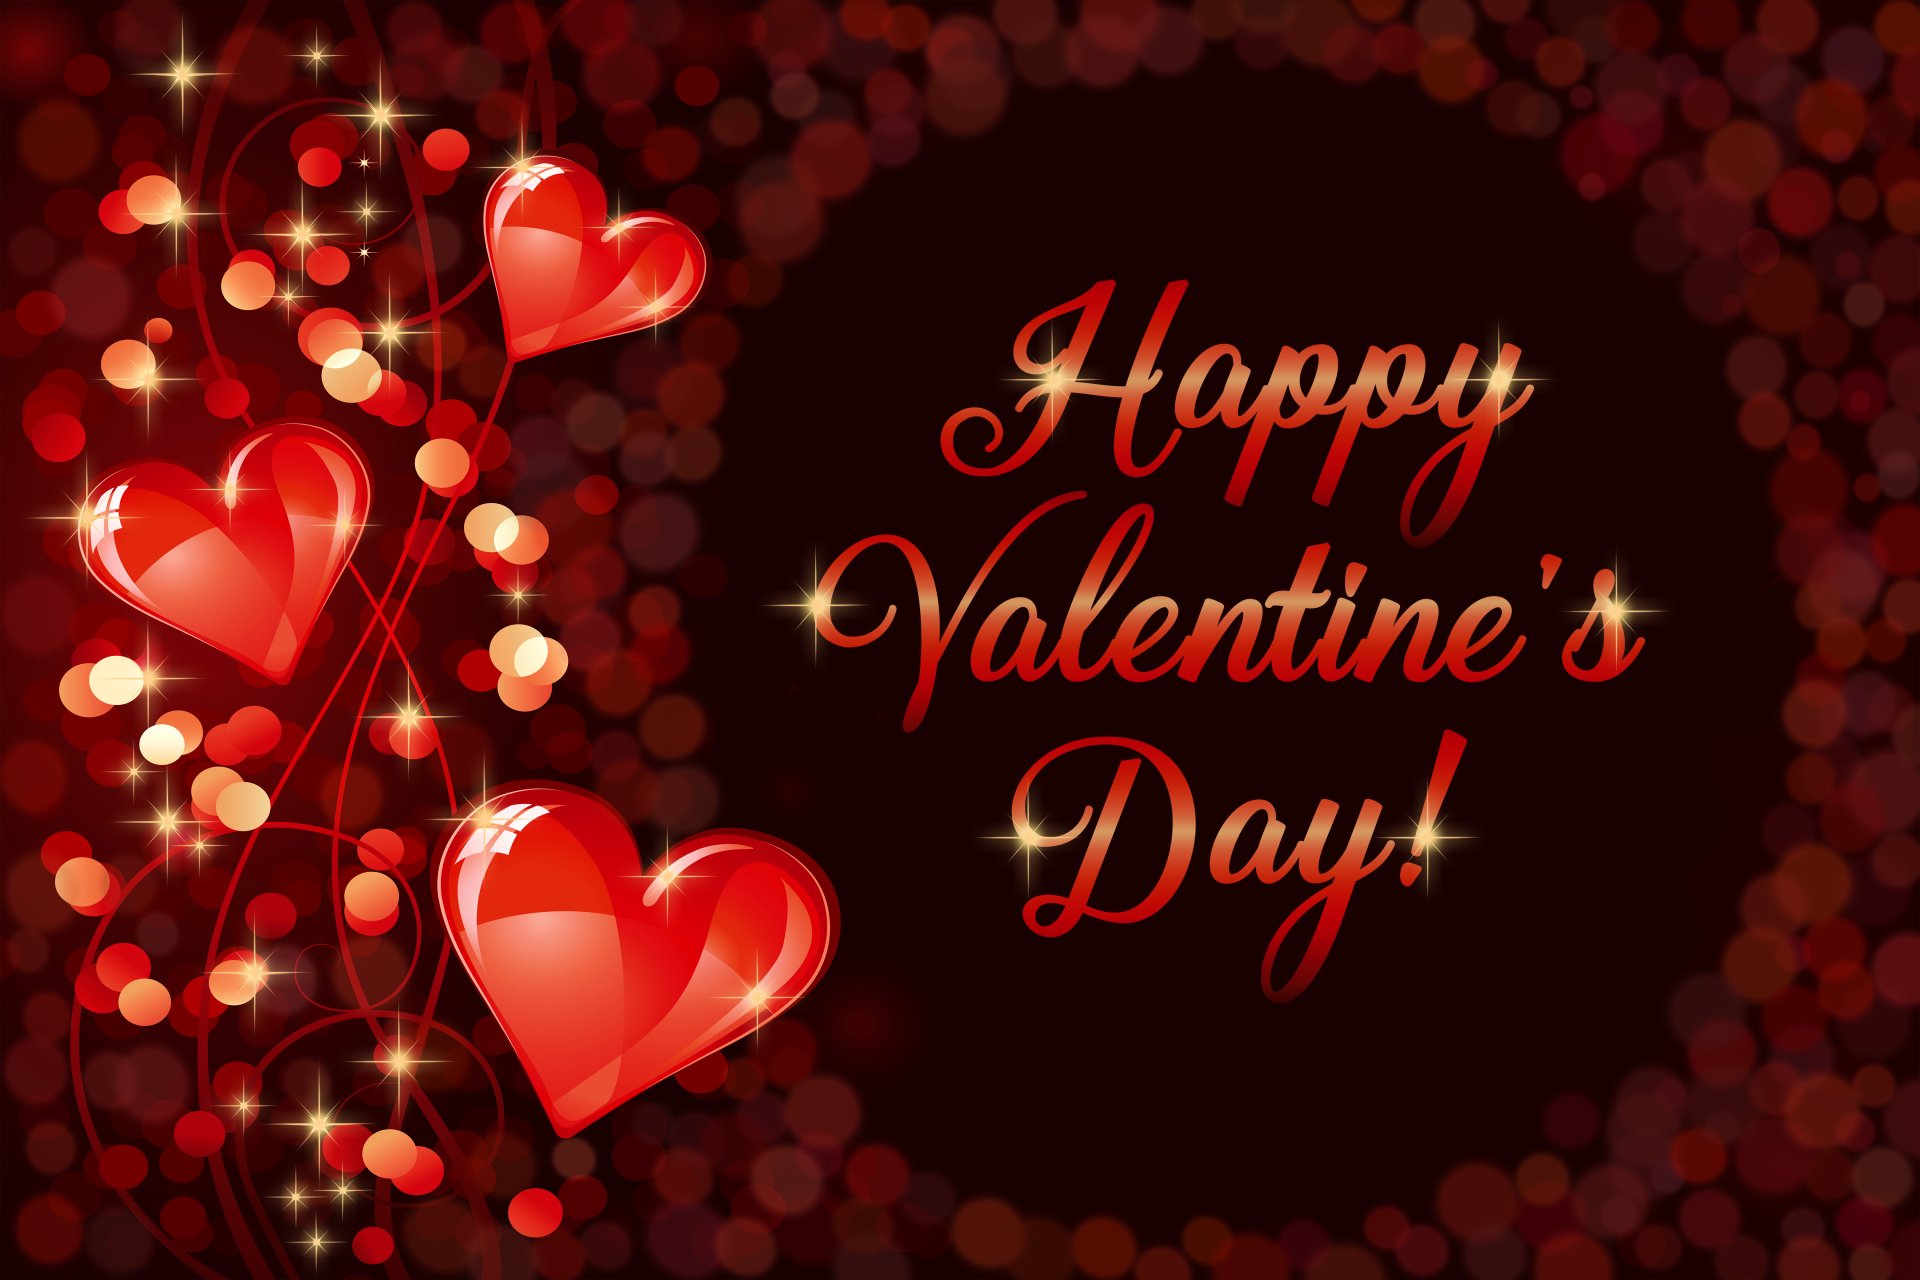 Valentines Day DIY Crafts And Gifts  Valentines wallpaper Desktop  wallpaper Free desktop wallpaper